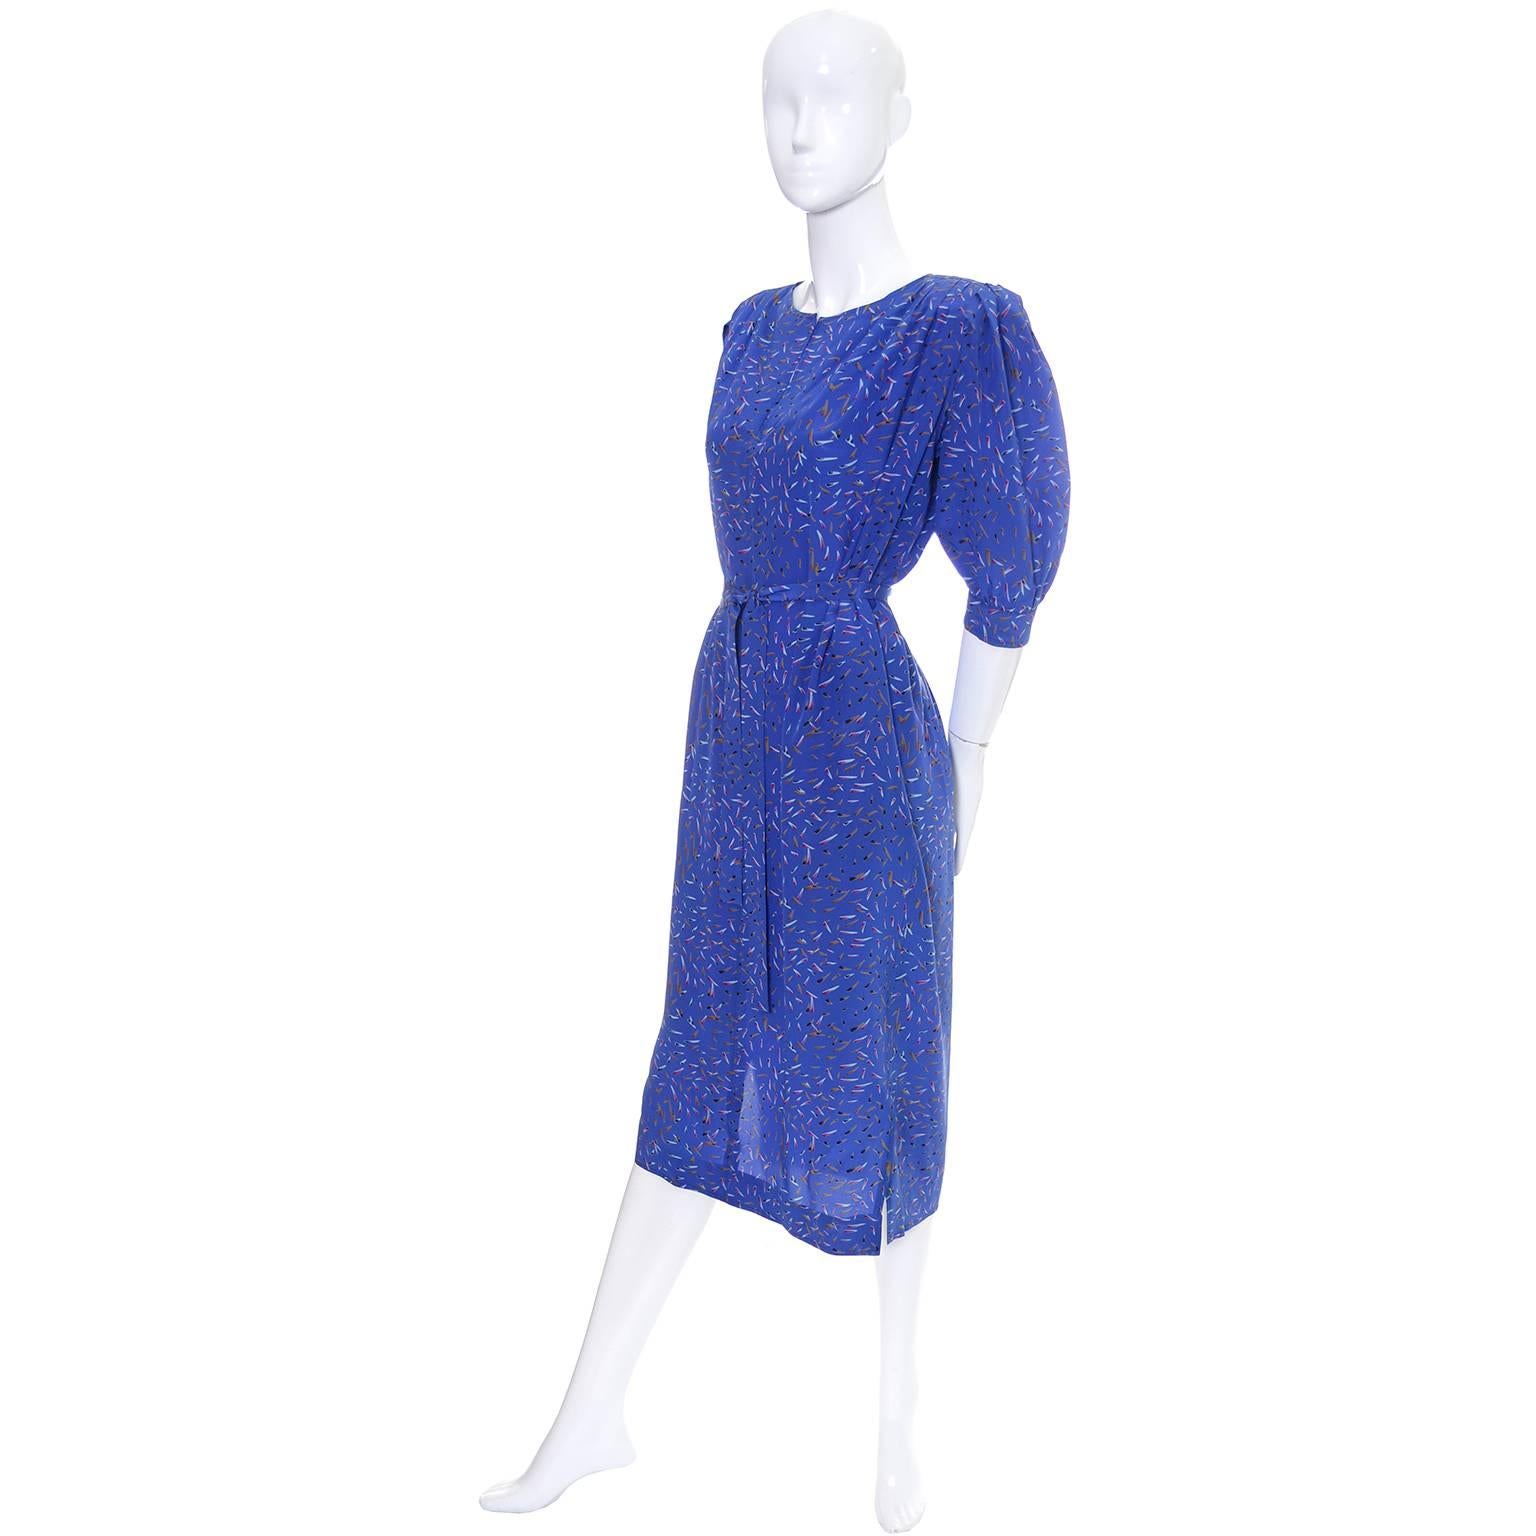 This pretty blue abstract print silk vintage Ungaro Parallele dress comes with a fabric sash and is in excellent condition. The dress has gathers at the shoulders, side slit pockets, shoulder pads, and 3/4 length gathered sleeves.  The dress is